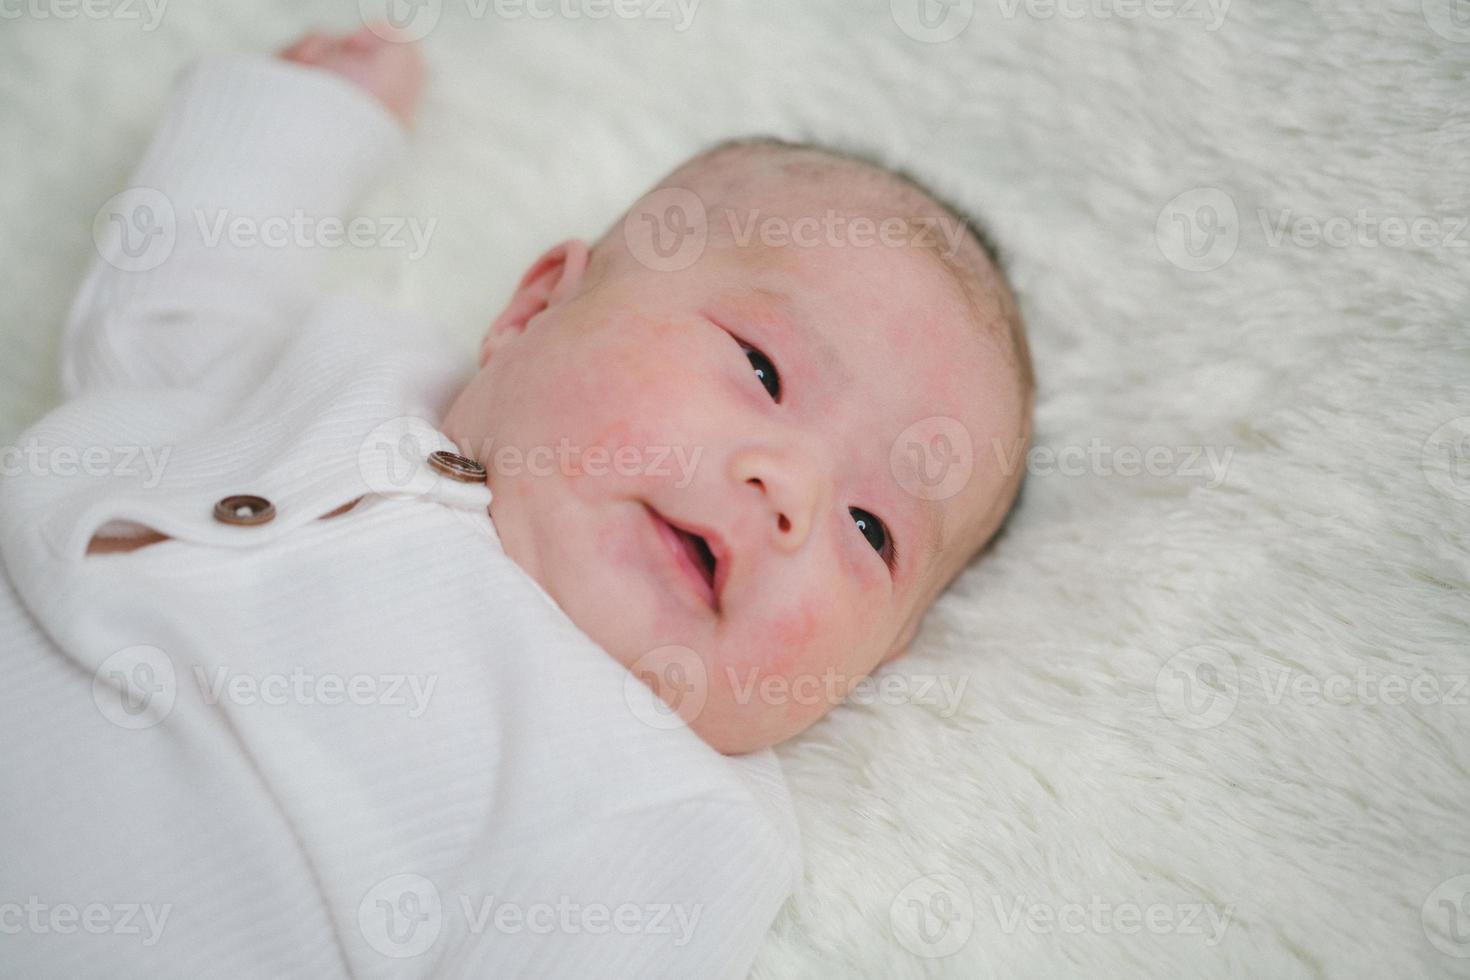 Closeup cute newborn baby in white bodysuit lying down alone on bed. Adorable infant rests on white bedsheets, staring at camera looking peaceful. Infancy, healthcare and paediatrics, babyhood concept photo